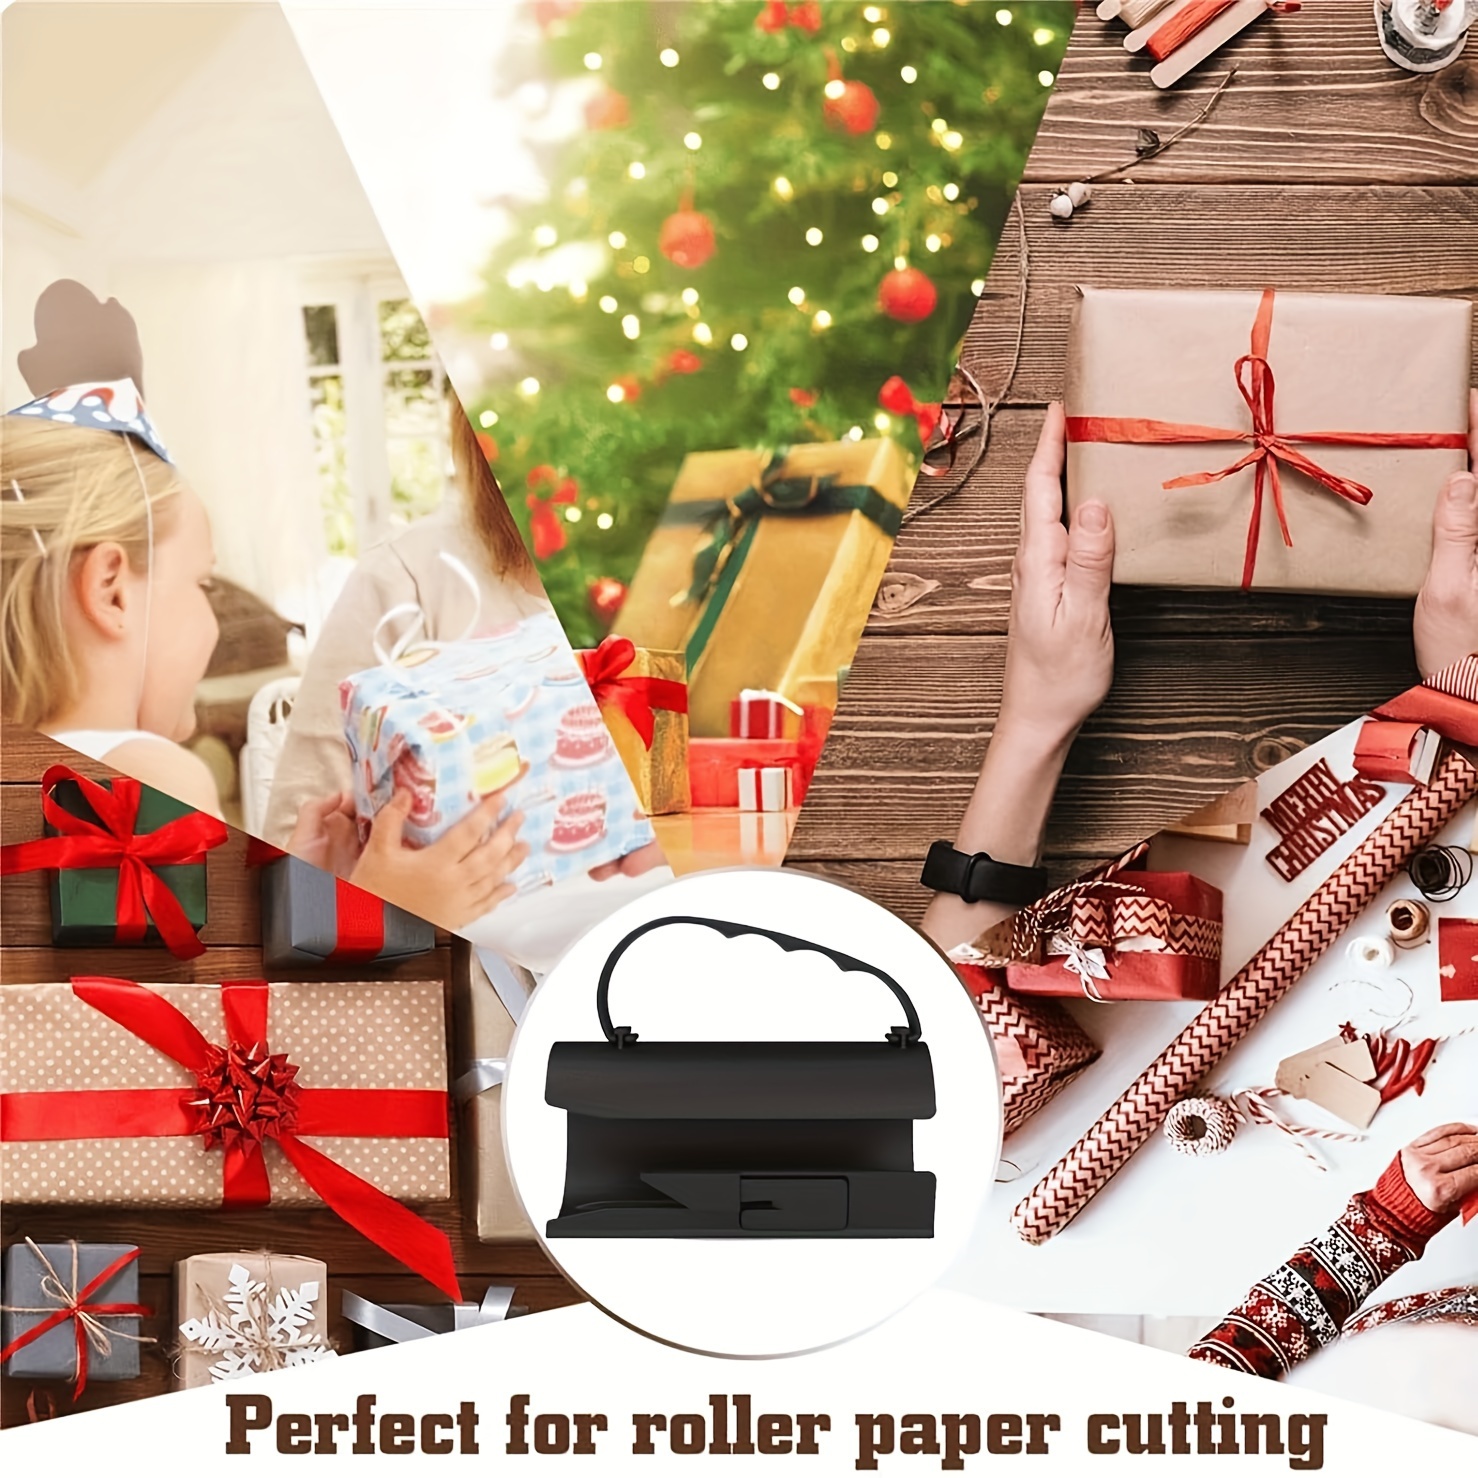 Wrapping Paper Cutter – Pigtails + Tutus